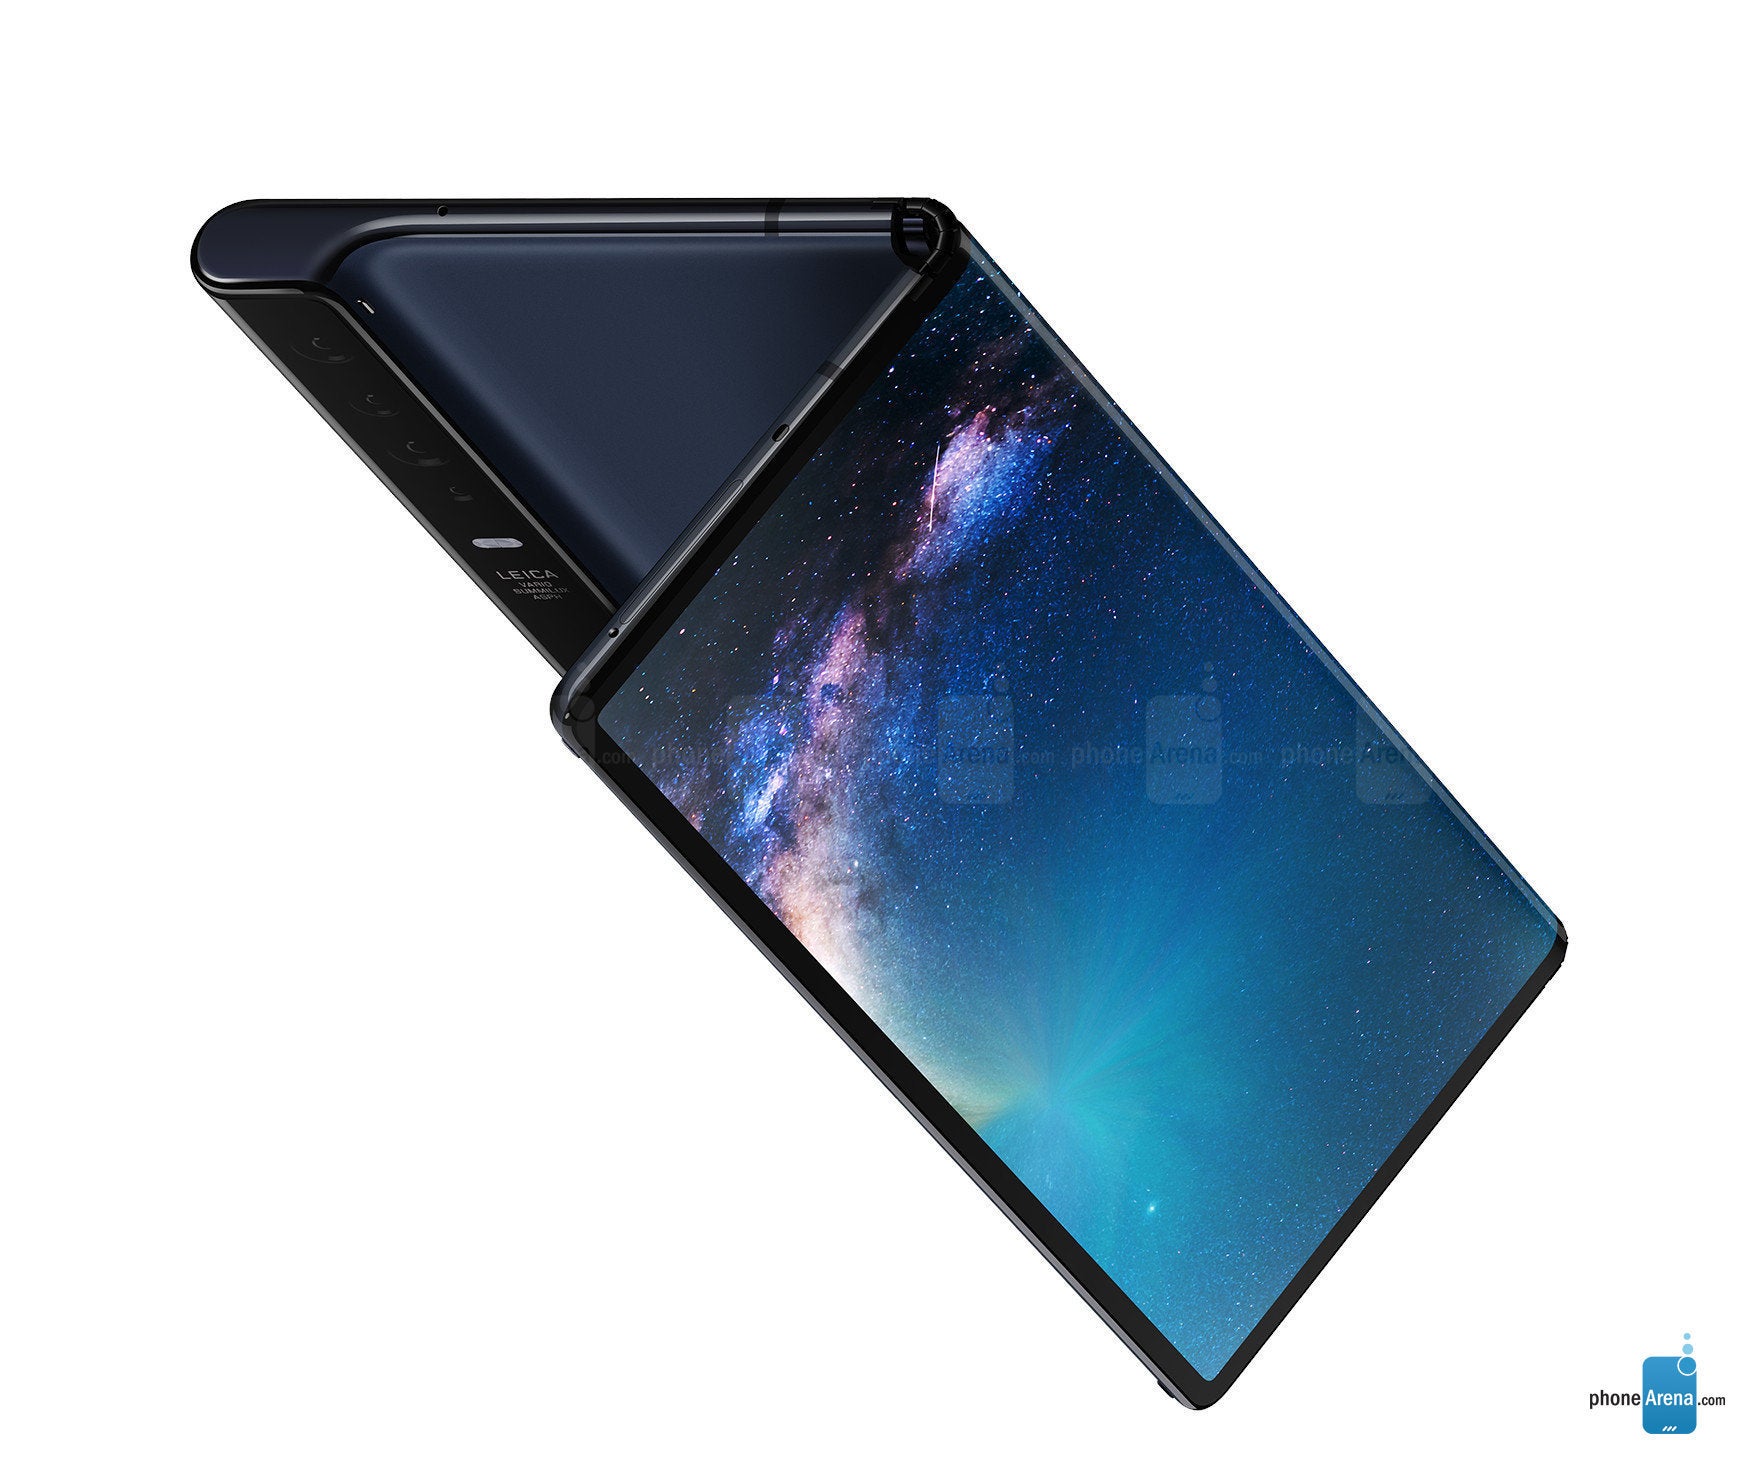 The foldable Huawei Mate X is due out sometime this summer - Global consumers shun Huawei phones online; Samsung and Xiaomi benefit in some markets